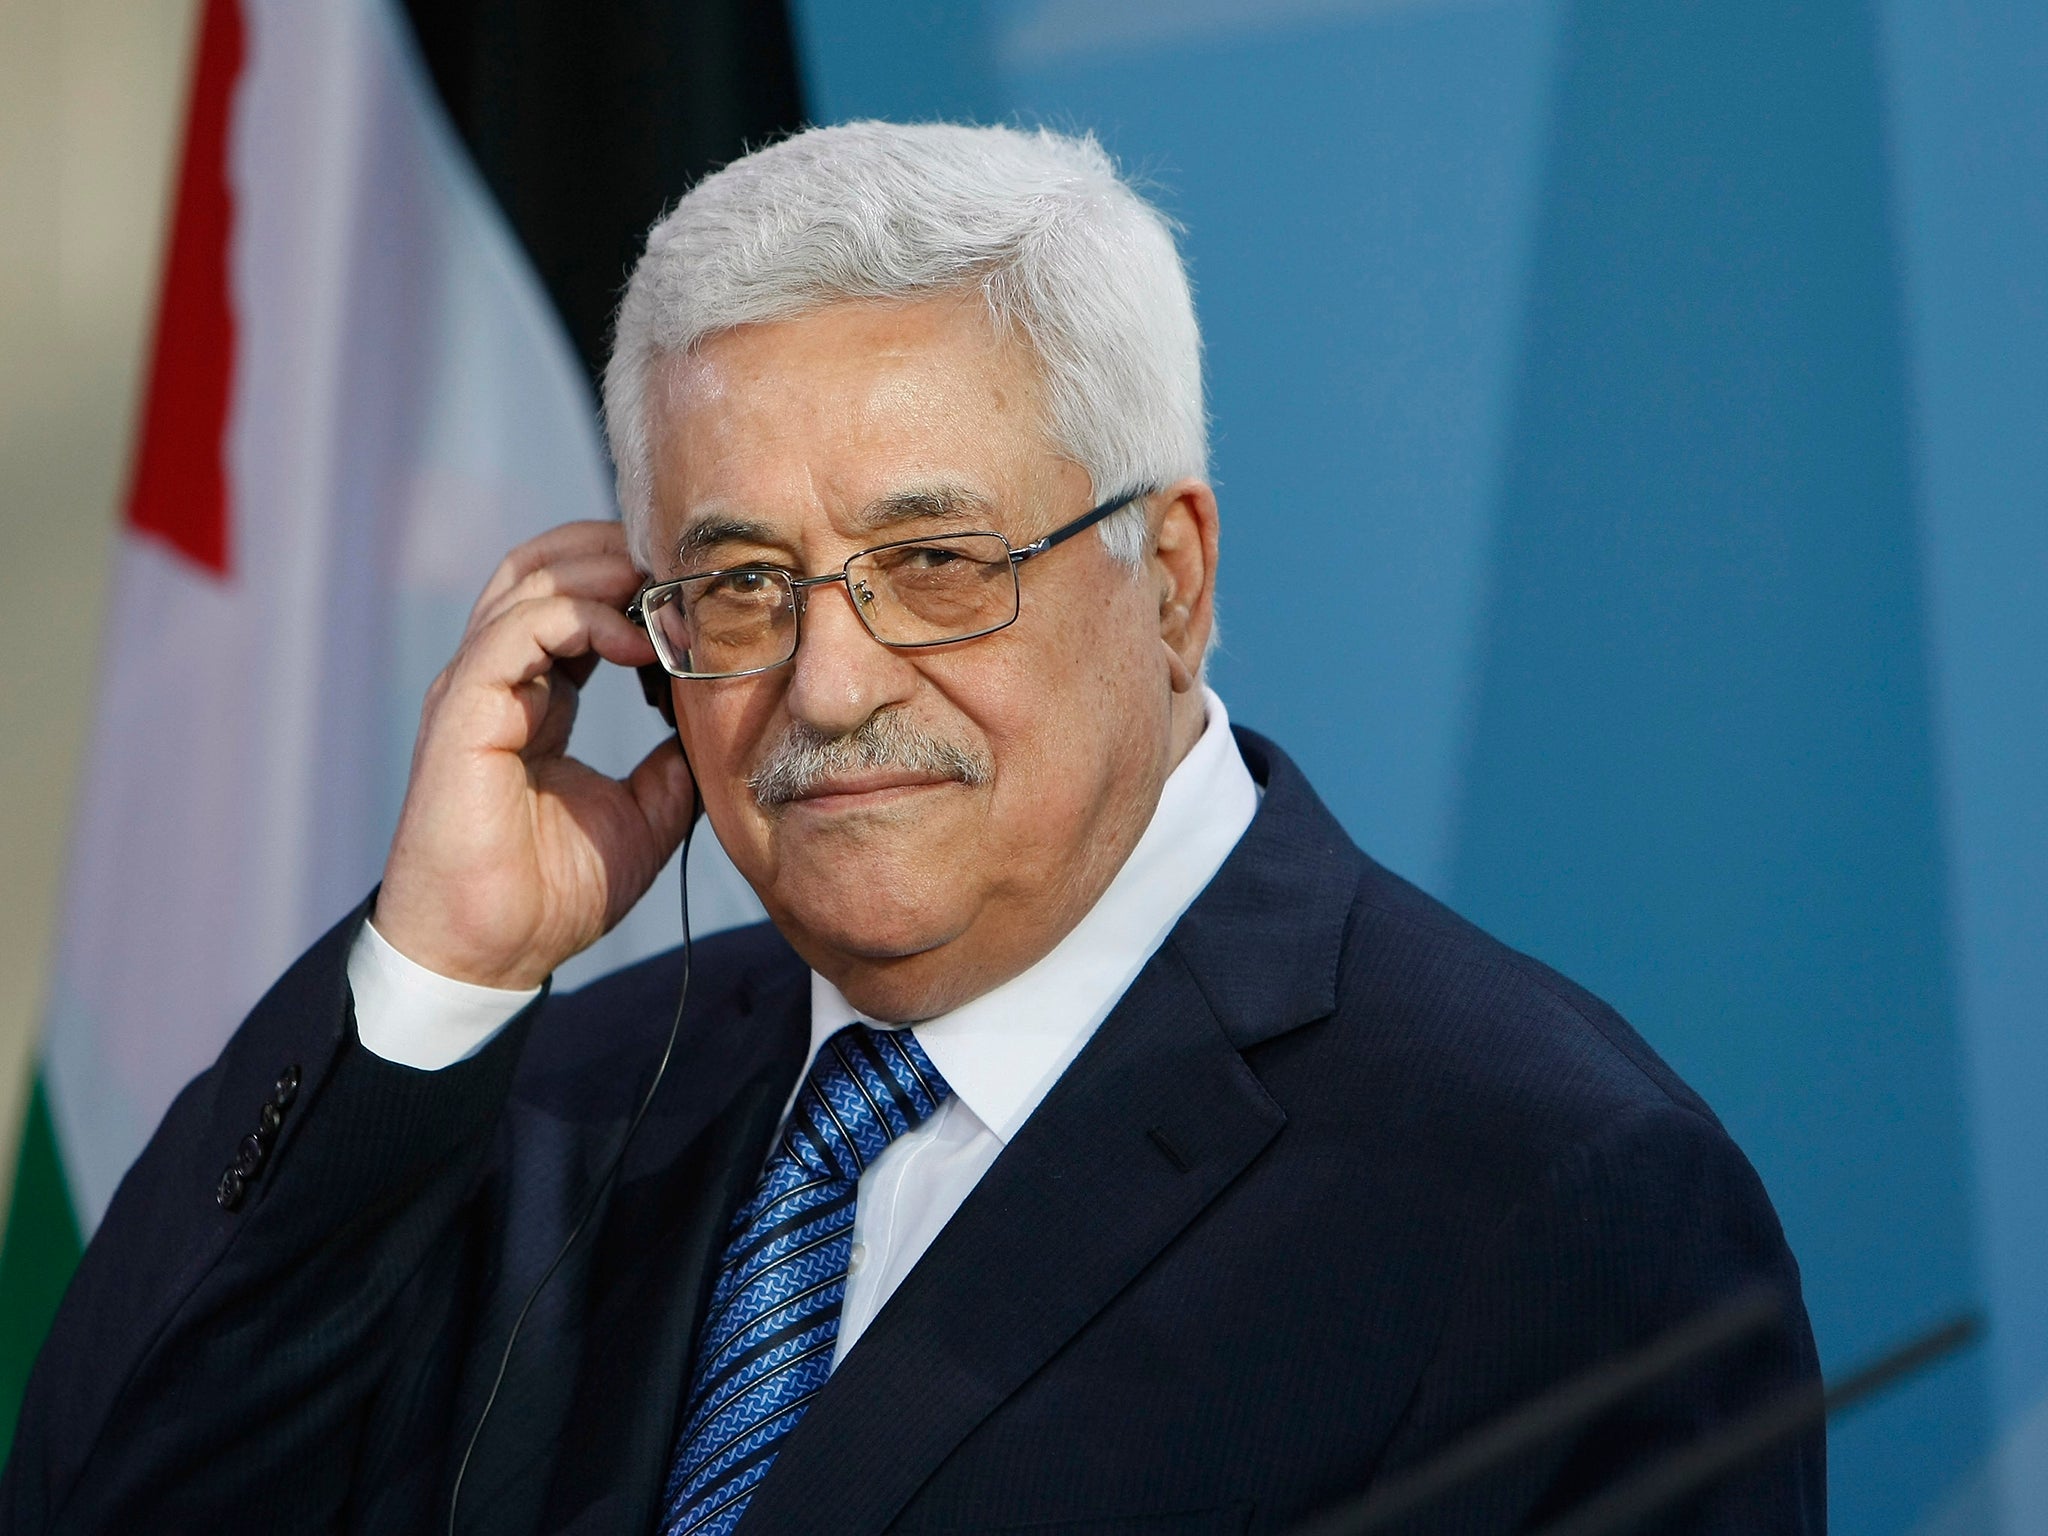 Palestinian Authority President Mahmoud Abbas denies ever working for the Russian secret service